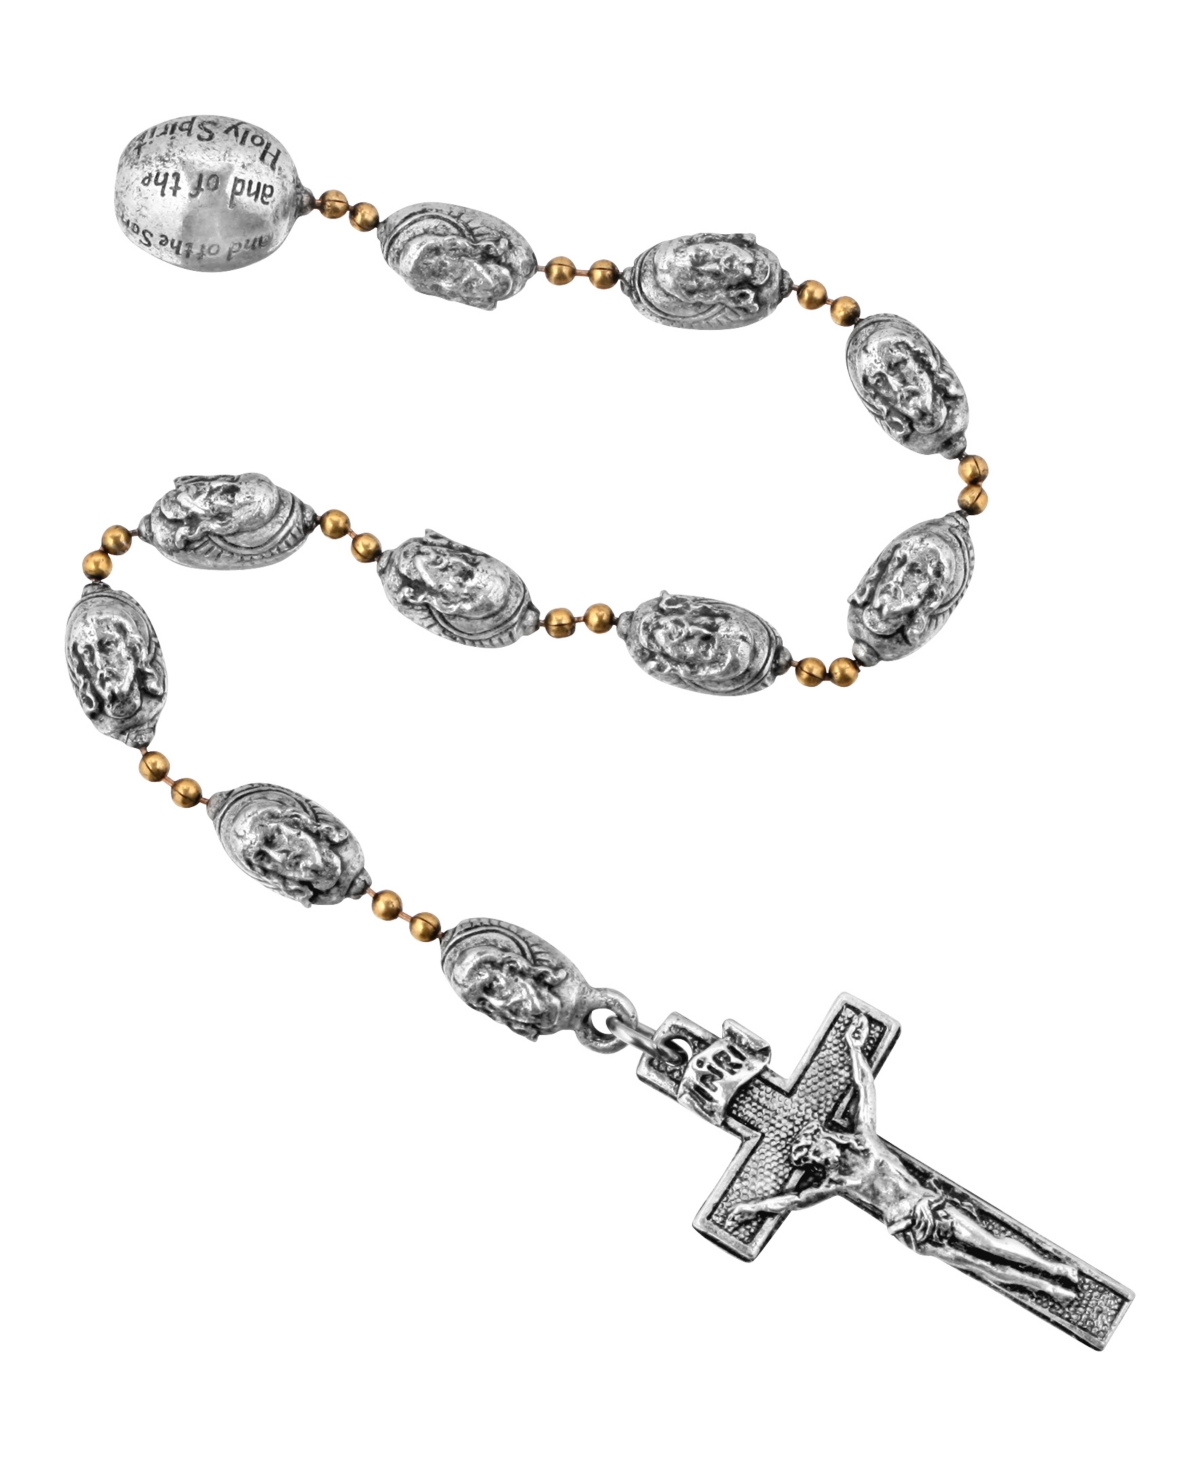 Pewter Our Father Creed Hand Rosary - Silver-Tone